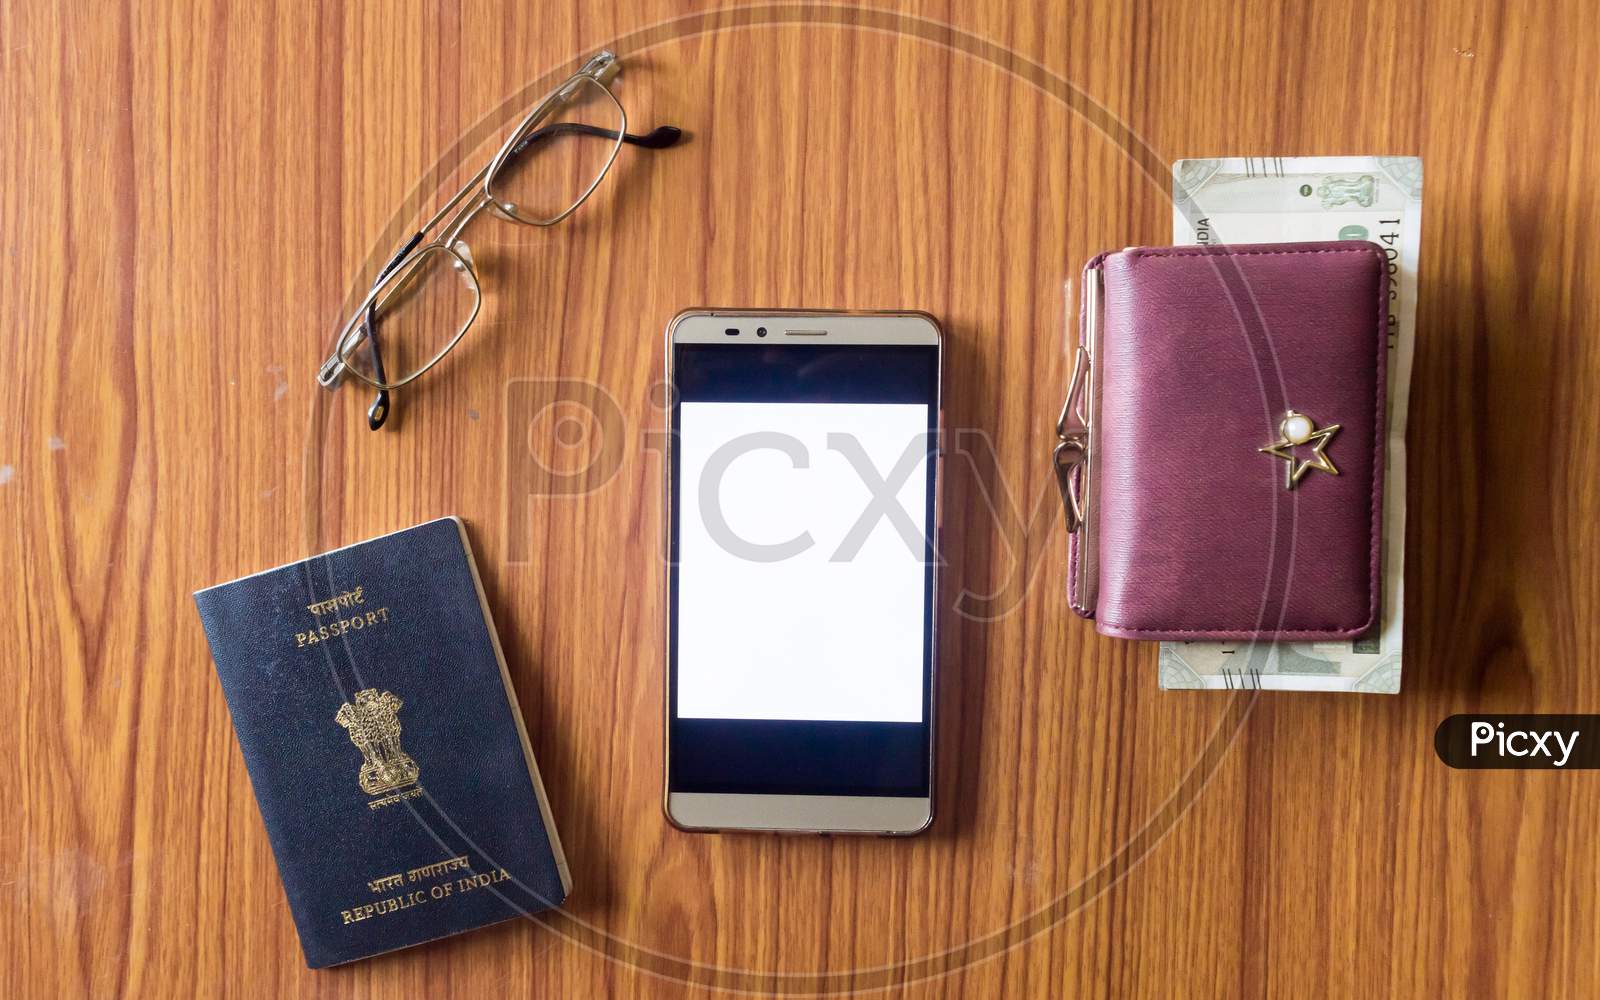 Business Still Life Concept. Personal Accessories On Table Desk. Indian Passport, Money Purse, Paper Currency, Eye Glasses And Mobile Phone With Blank Screen. Top View With Copy Space For Text. Mockup